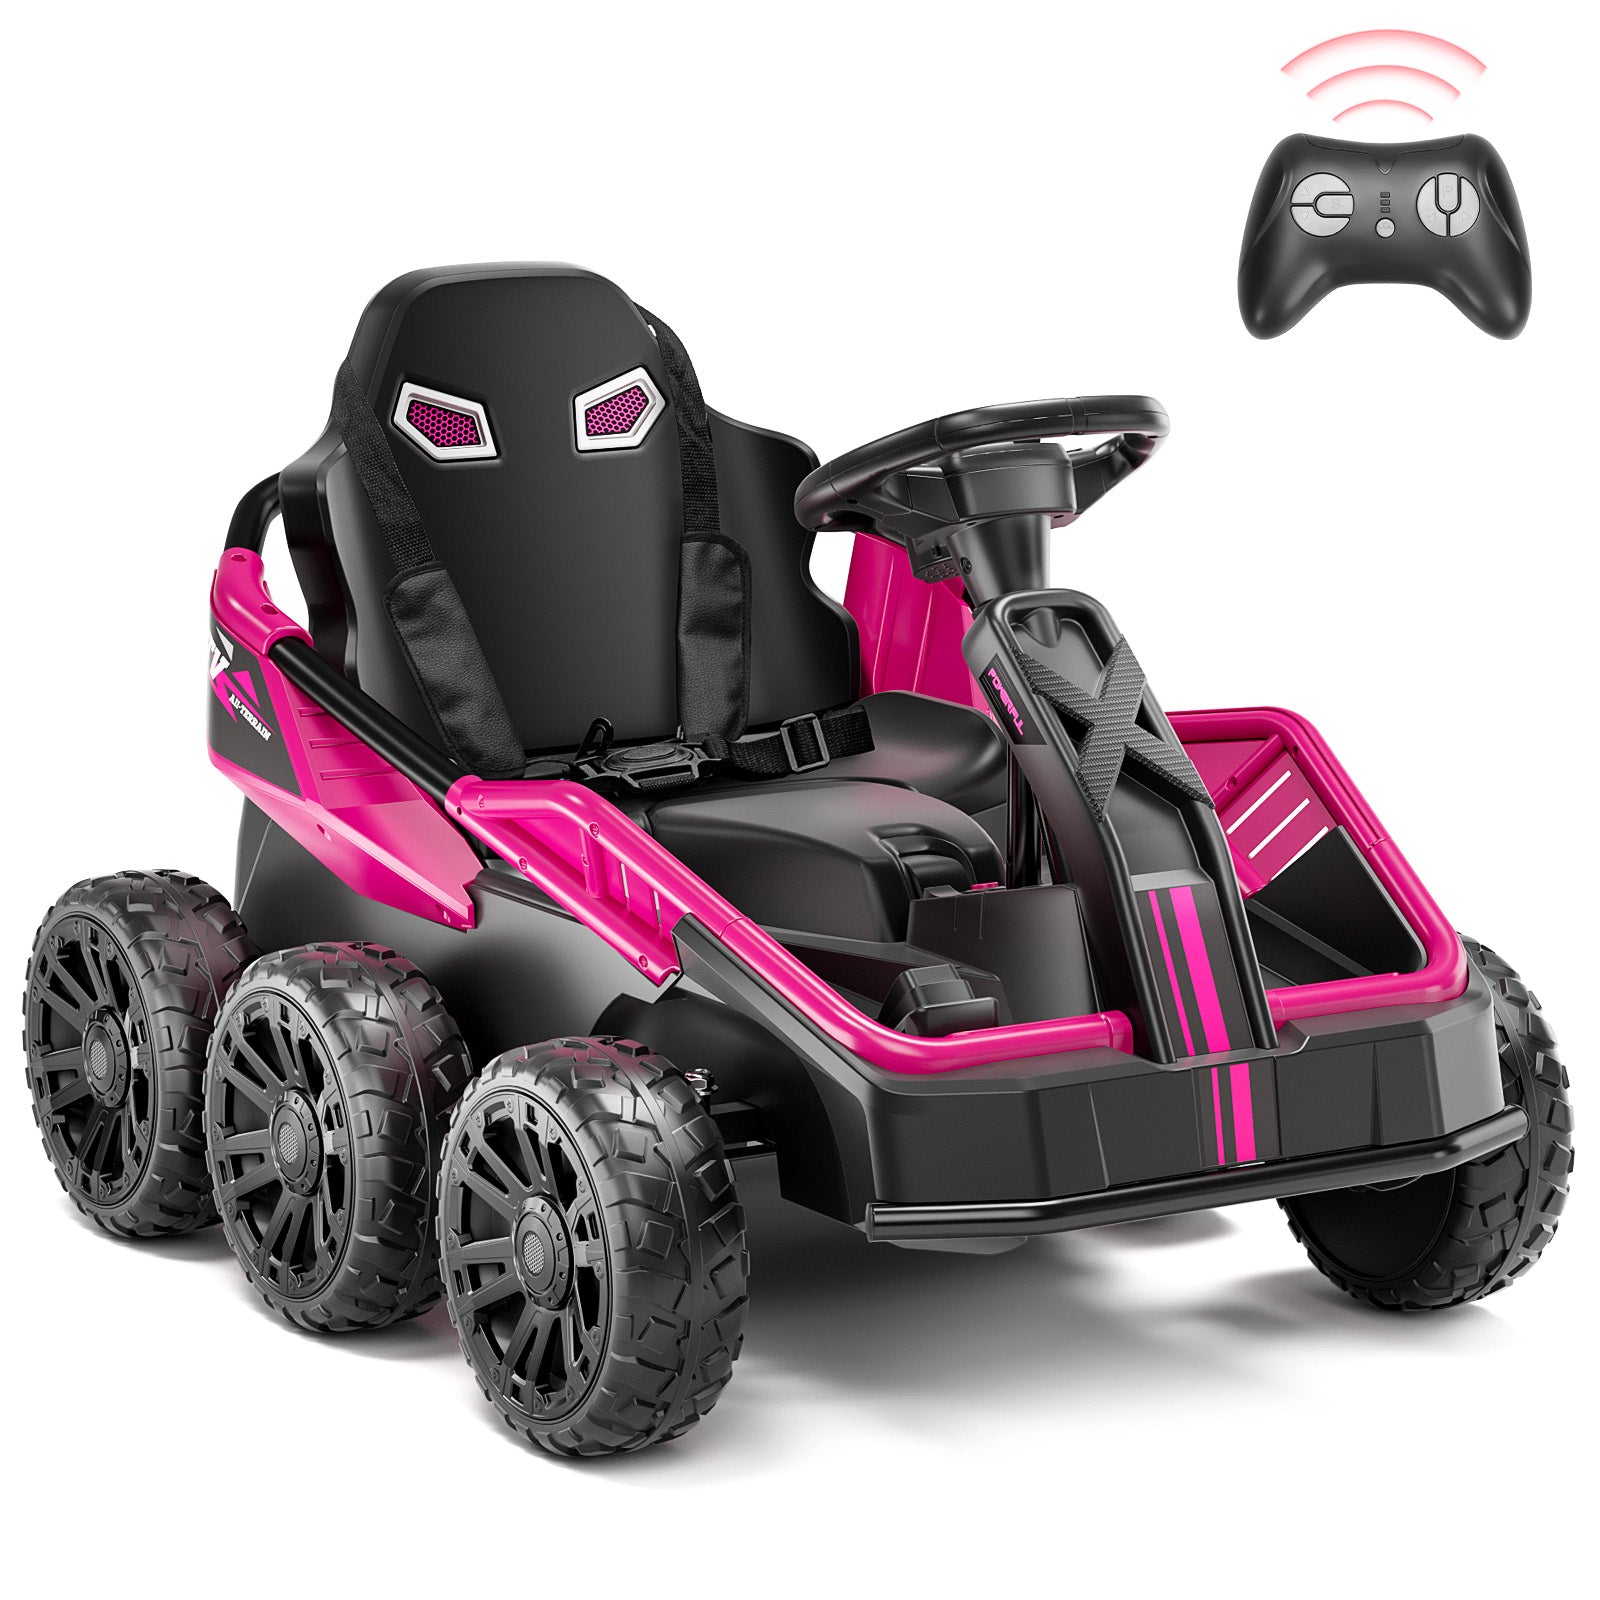 24V Ride on Toys for Big Kids, 6 Eva Wheels UTV, 4x75W 5.9MPH Powerful Electric Car, 4WD/2WD Switch, Parent Remote, 4 Shock Absorbers, Ideal Gift for Kids Ages 3+, MER-X Pro Pink